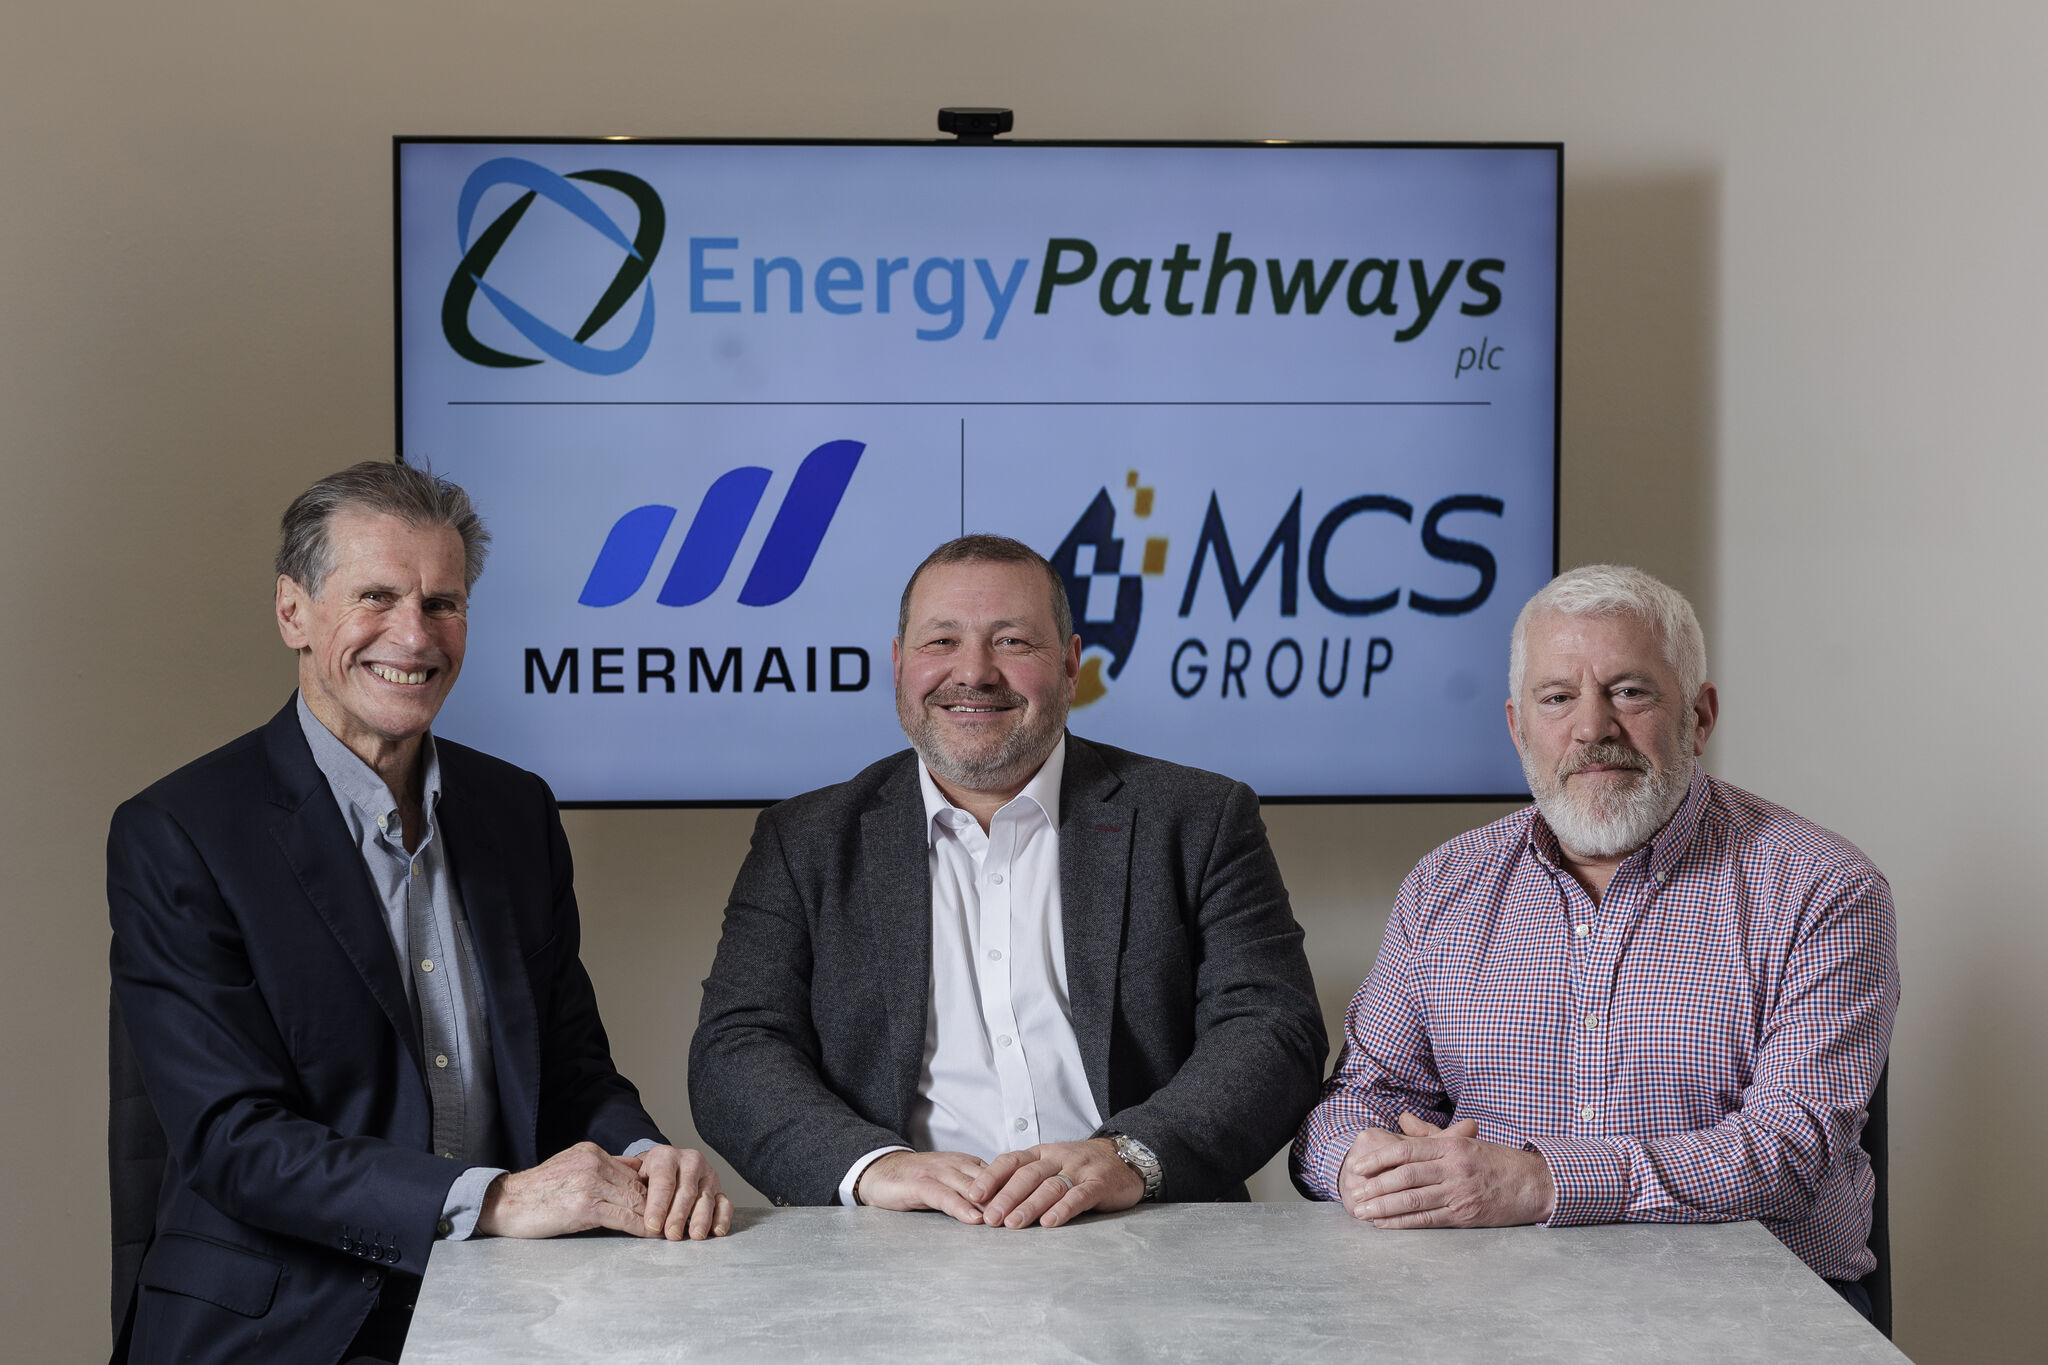 L-R: Graeme Marks, Director & Co-Founder, EnergyPathways; Scott Cormack, Regional Director, Mermaid Subsea Services UK; and Charlie Hughes, Pipelay Services Manager, MCS Group